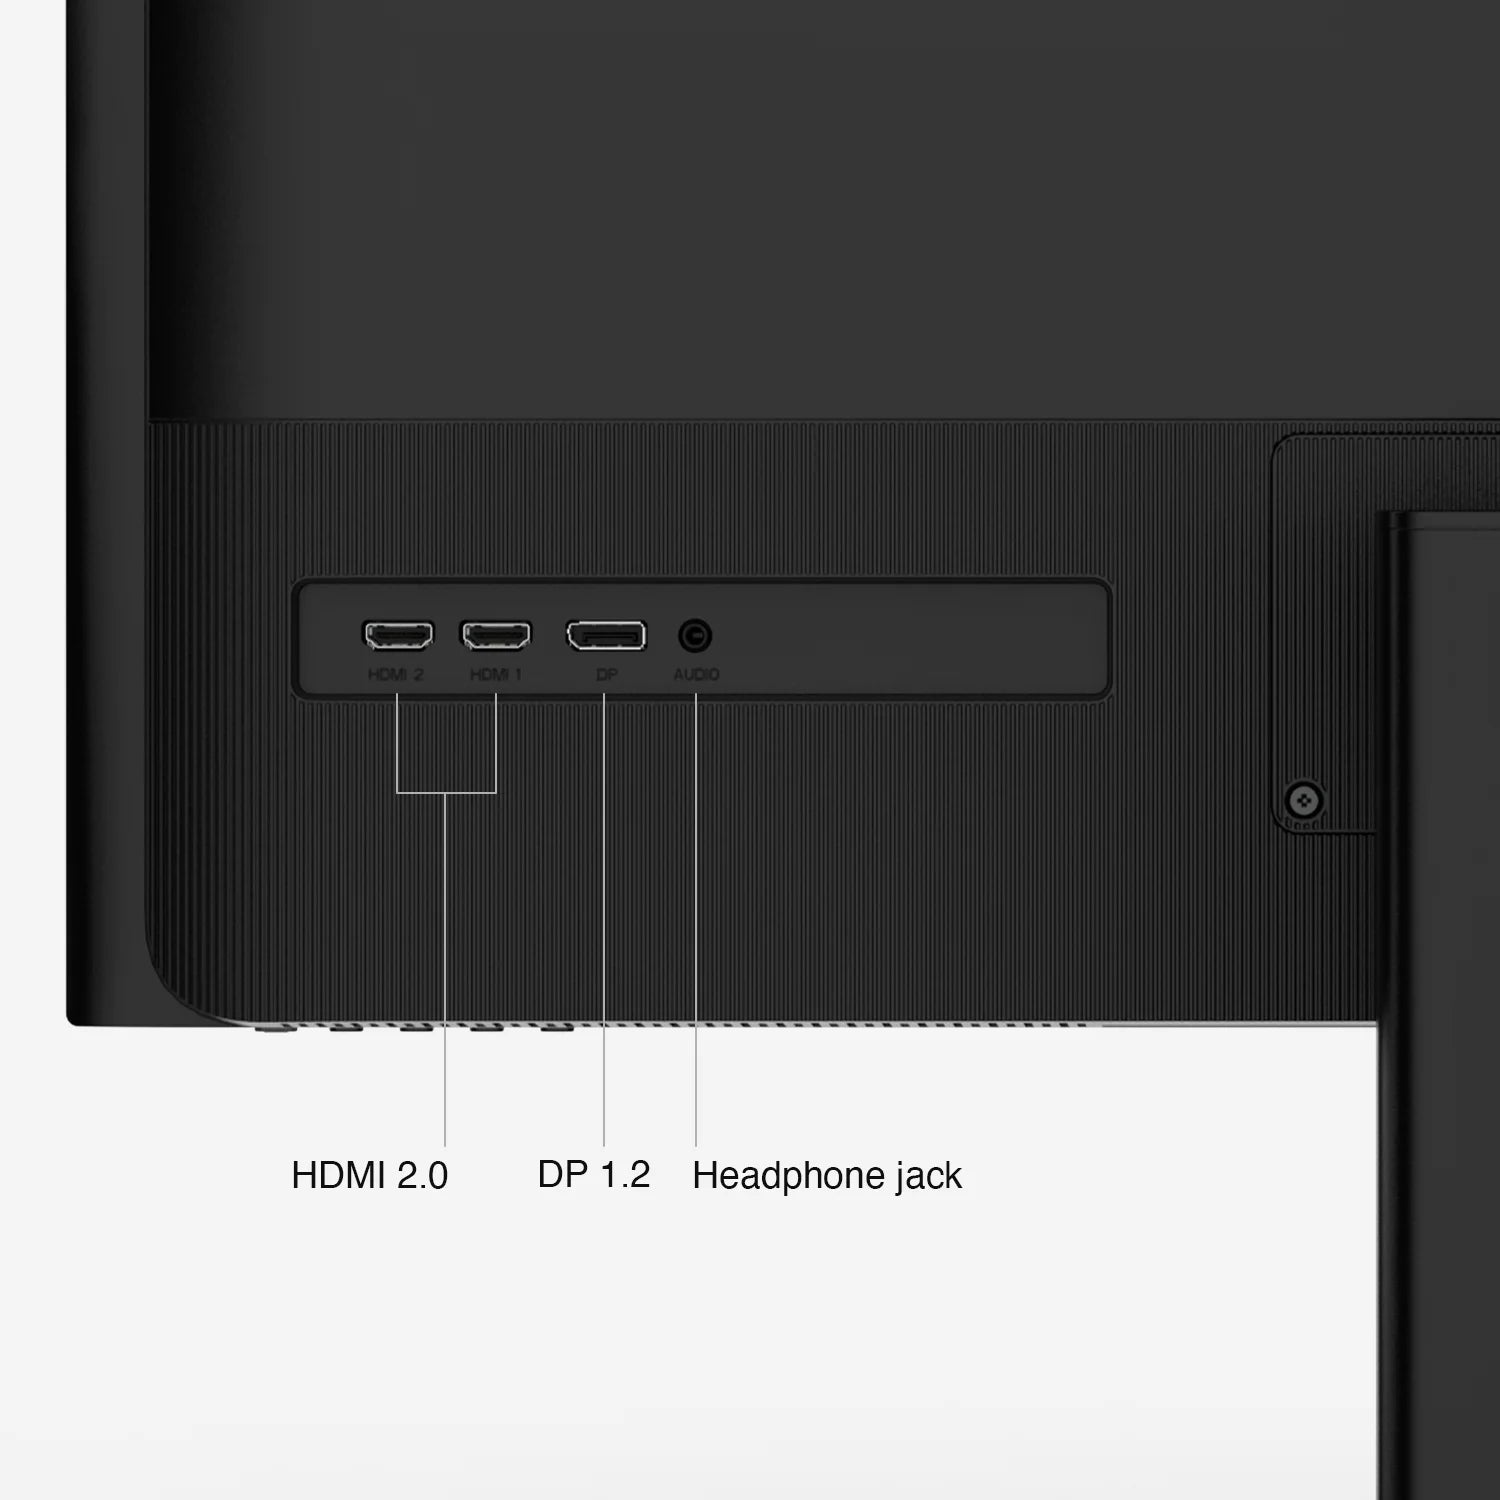 Connections of MP 4k monitor